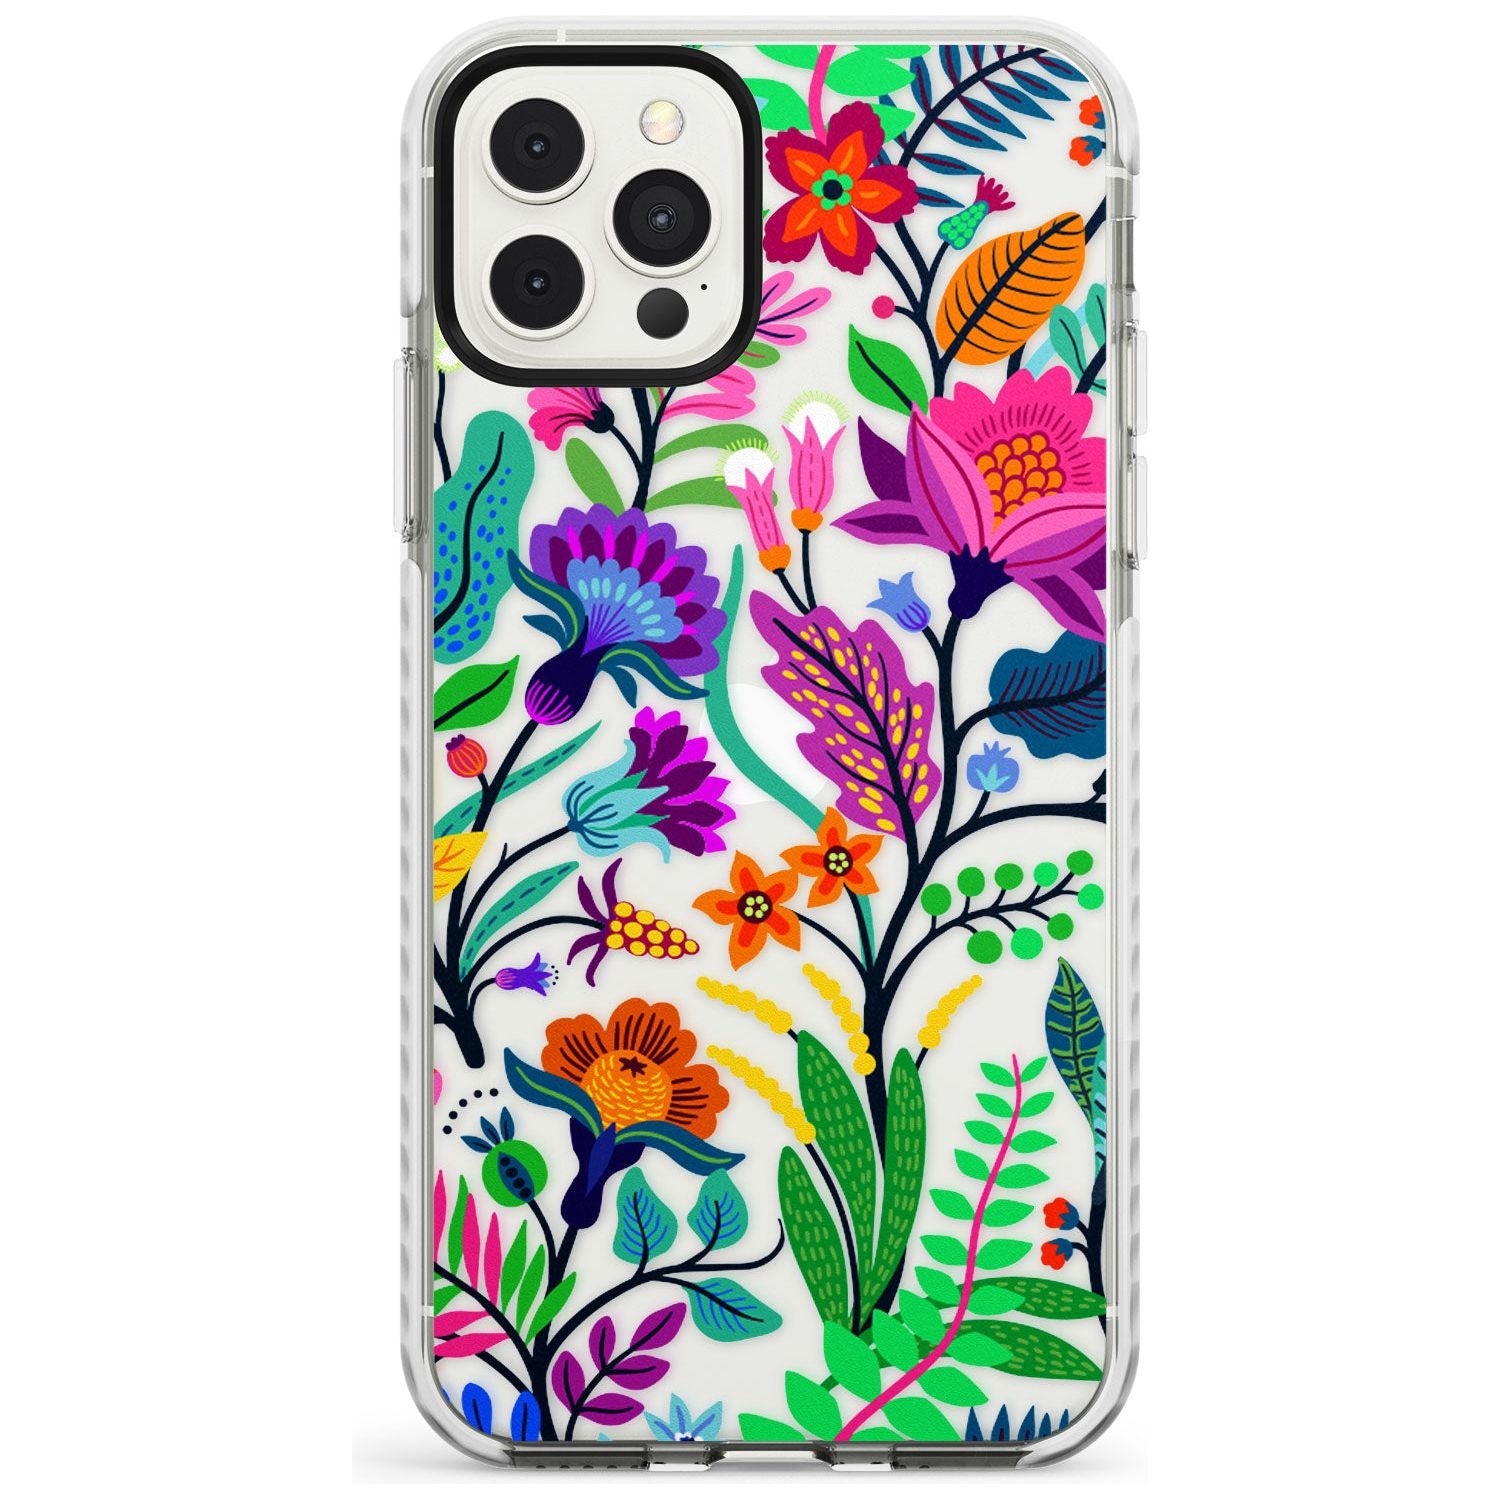 Floral Vibe Impact Phone Case for iPhone 11 Pro Max